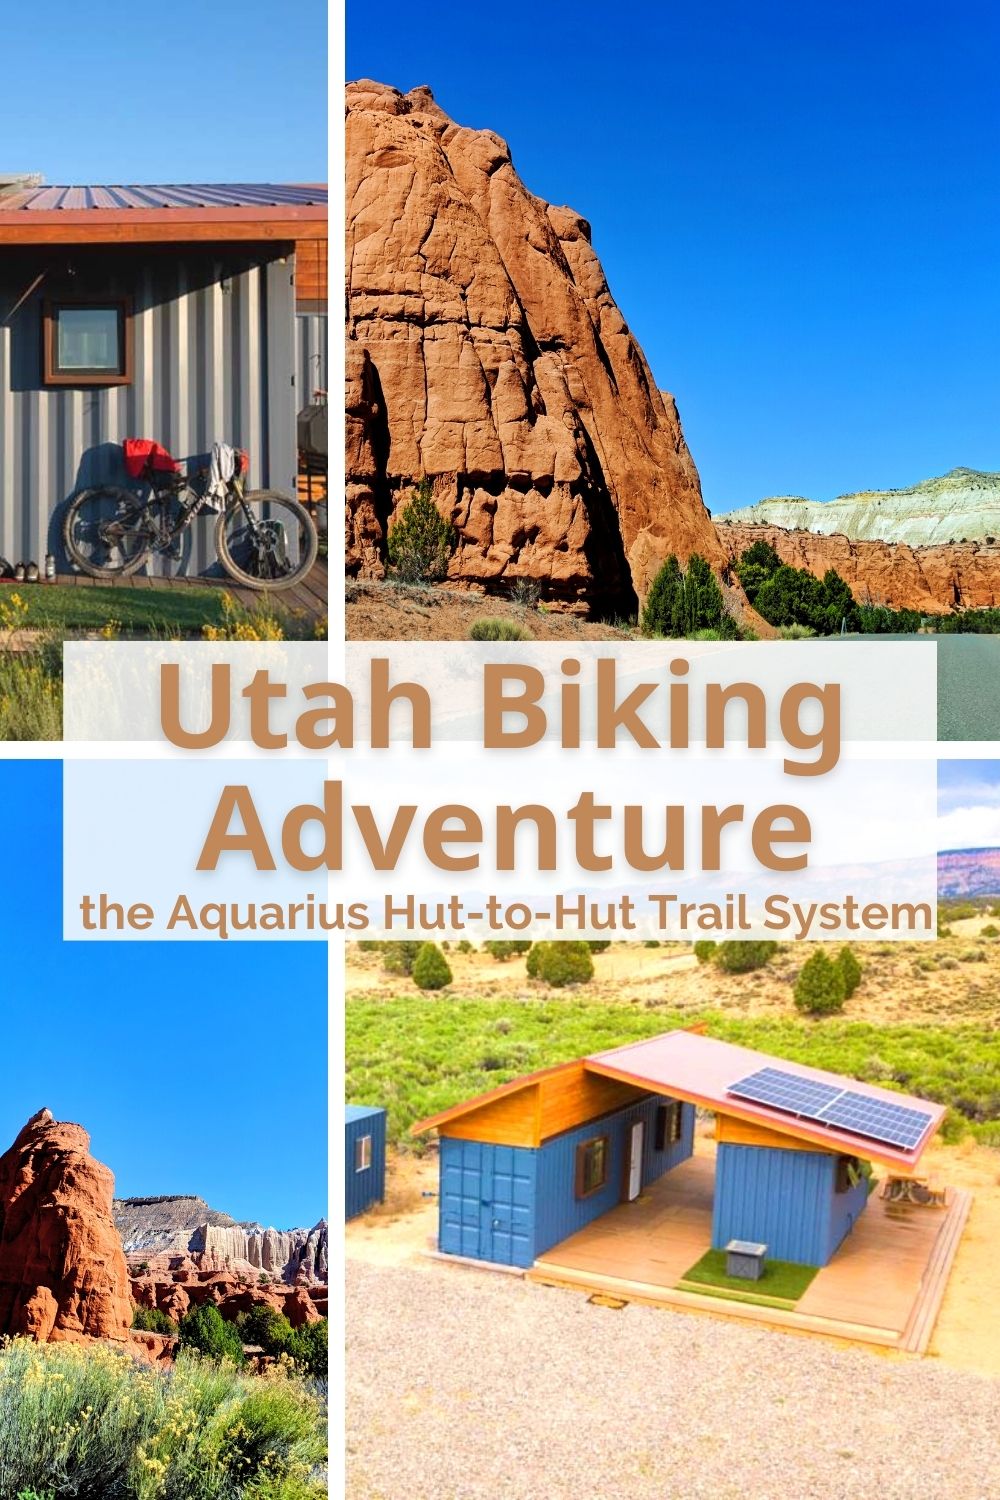 This epic Utah biking journey takes you through Color Country, from Cedar Breaks National Monument to Grand-Staircase Escalante. Staying in eco-huts along the way, doing a 190 mile mountain bike adventure in Utah is a bucket list item for outdoors people.